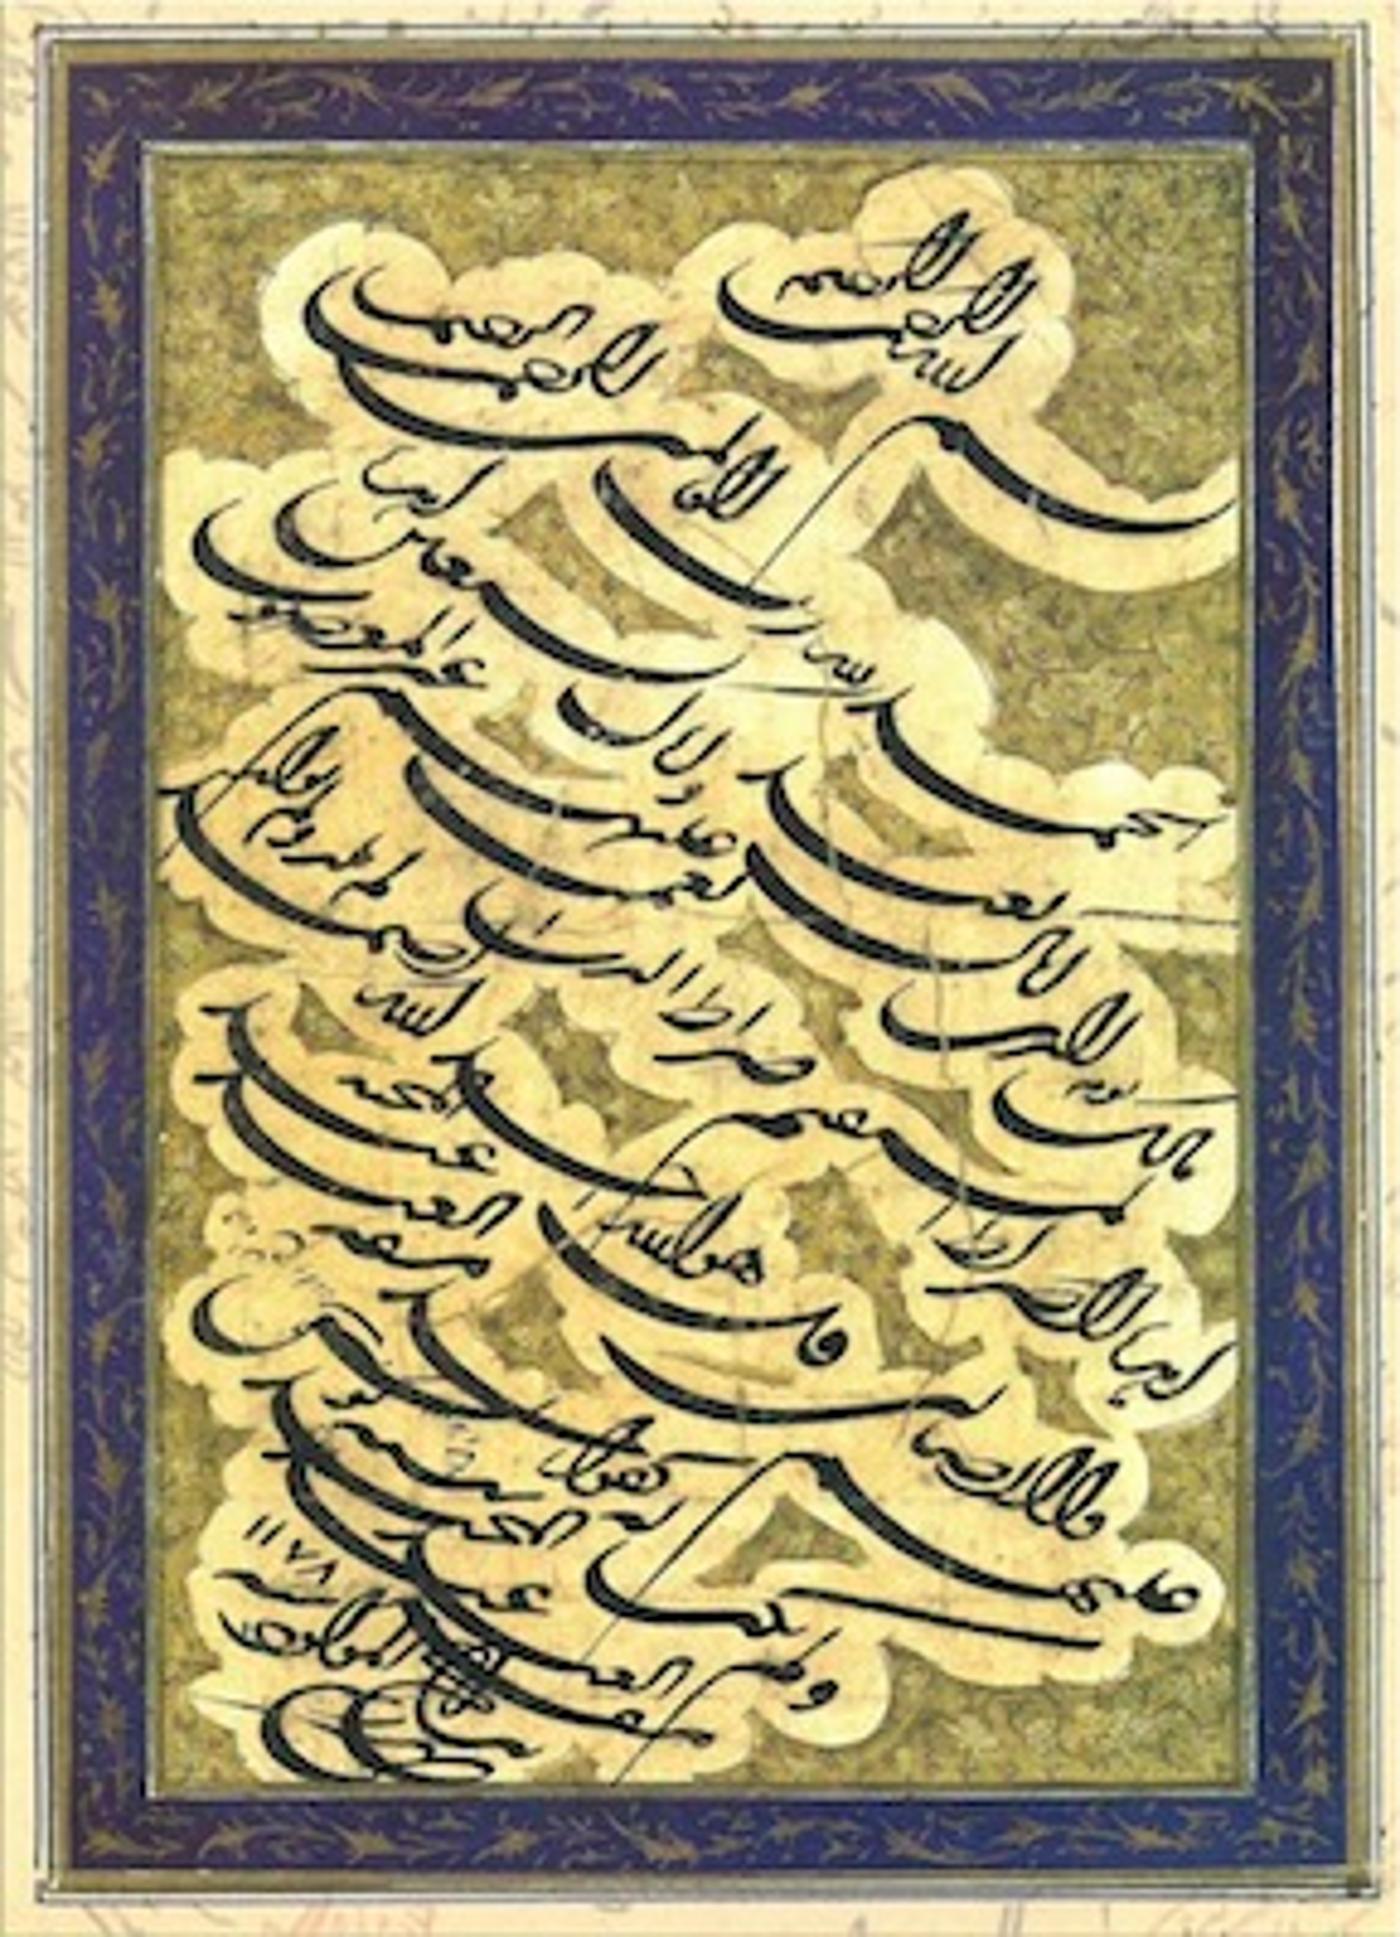 Calligraphy and calligraphers at the Mogul court, 16th-17th centuries